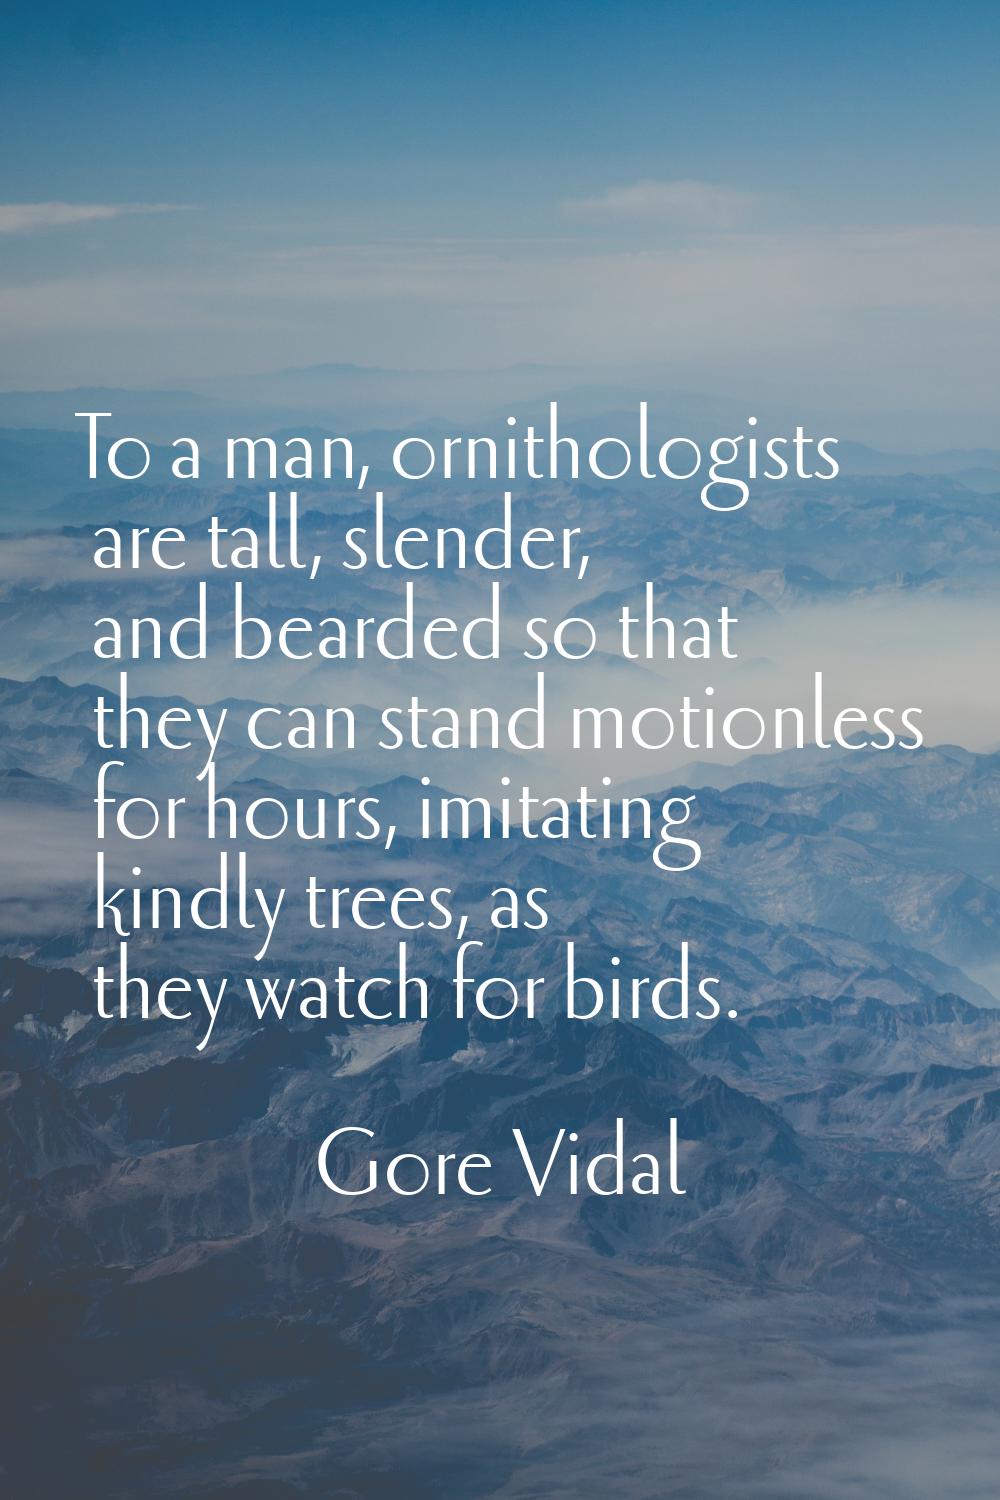 To a man, ornithologists are tall, slender, and bearded so that they can stand motionless for hours